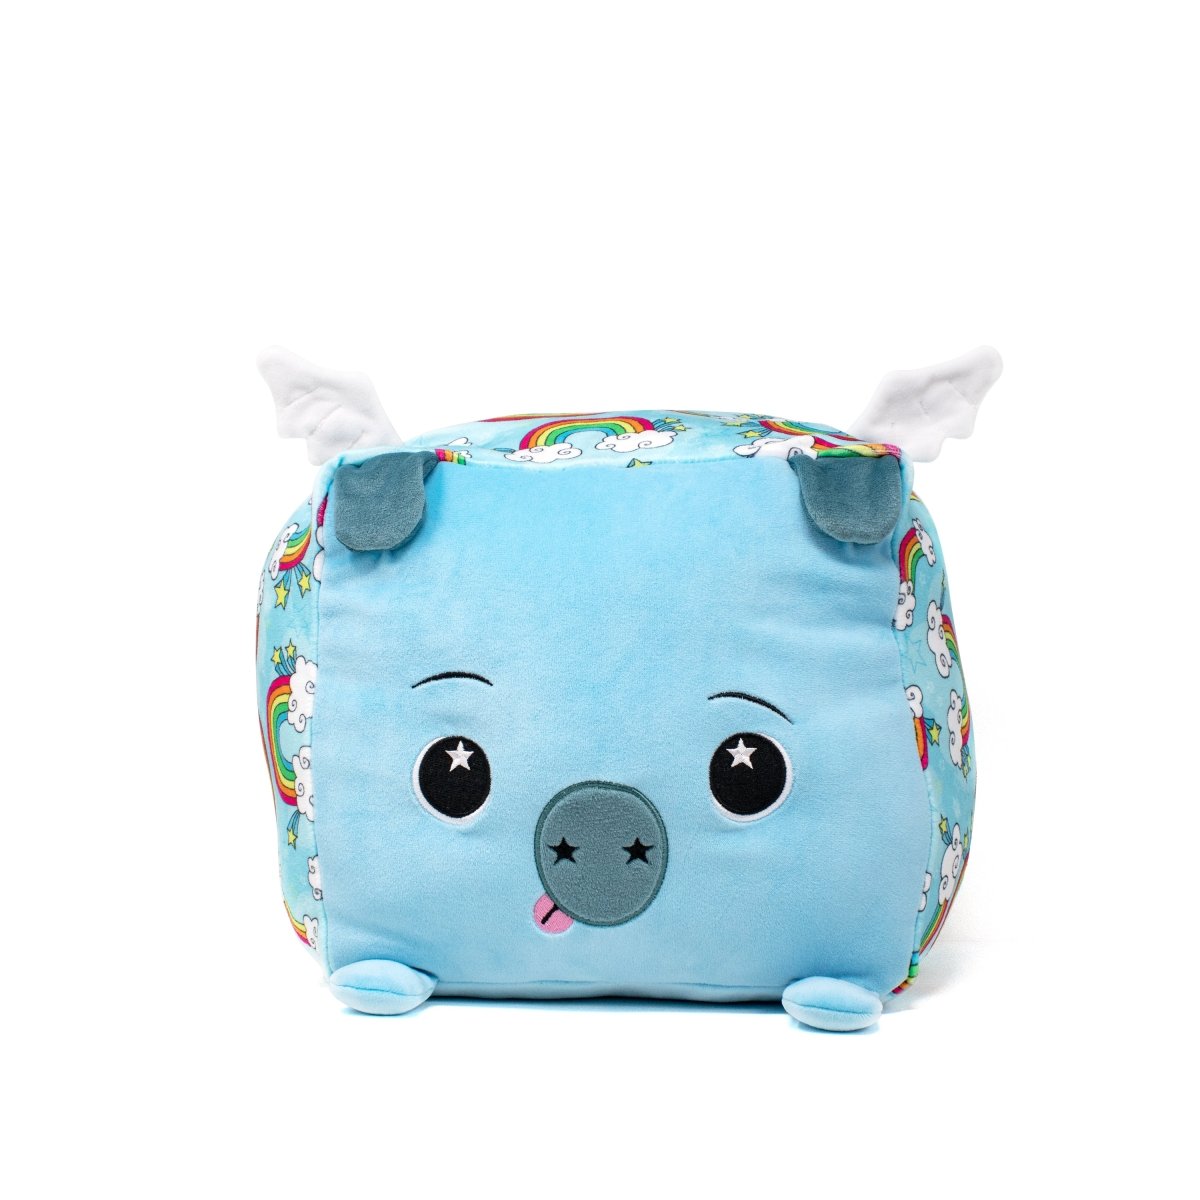 Augustus the Pig plush toy with sky-blue fur, wings, and playful expression from Moosh-Moosh SQUARED² Collection.